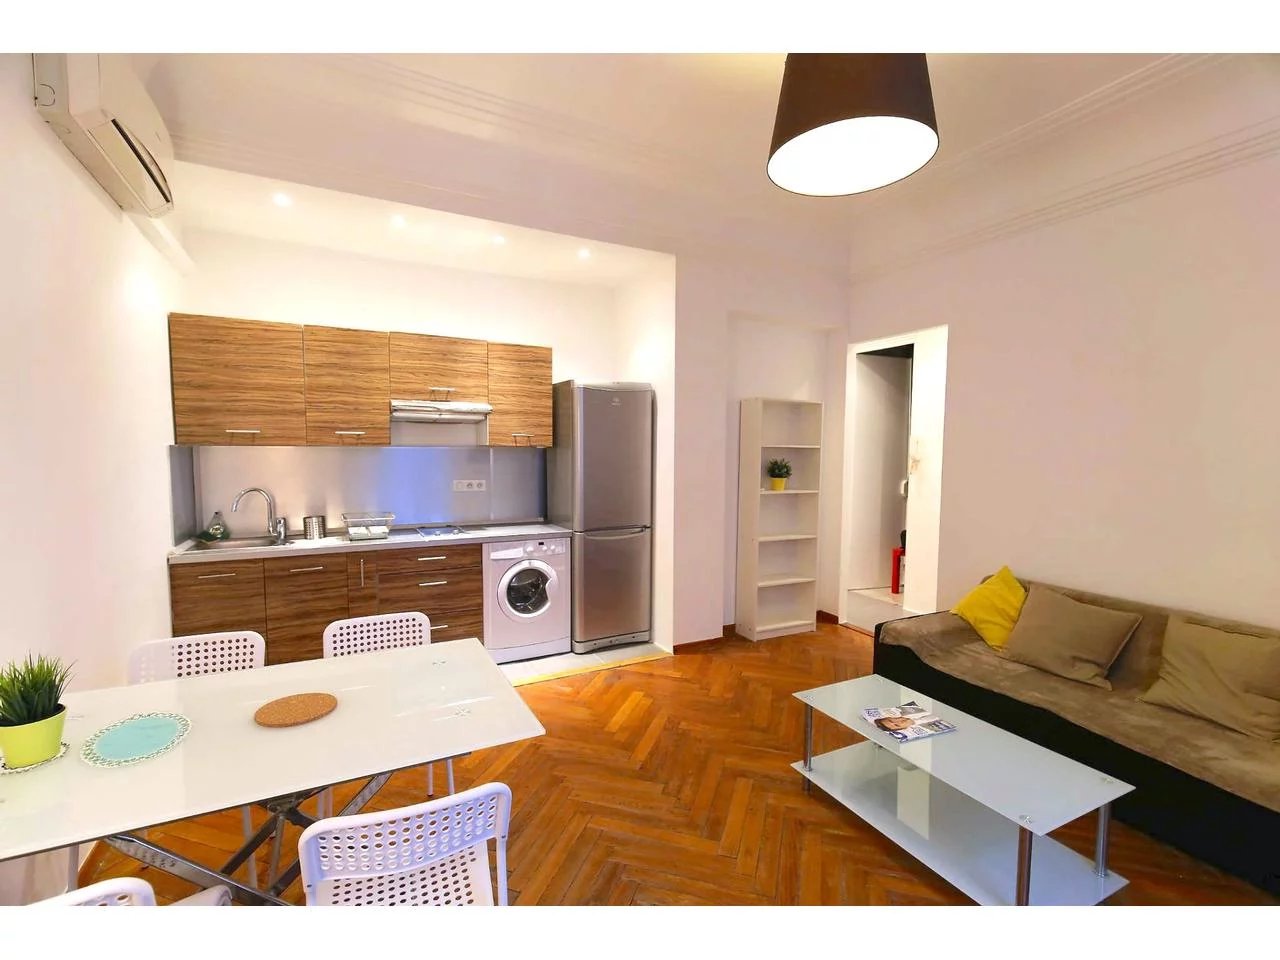 Appartement  2 Rooms 33.05m2  for sale   215 000 €